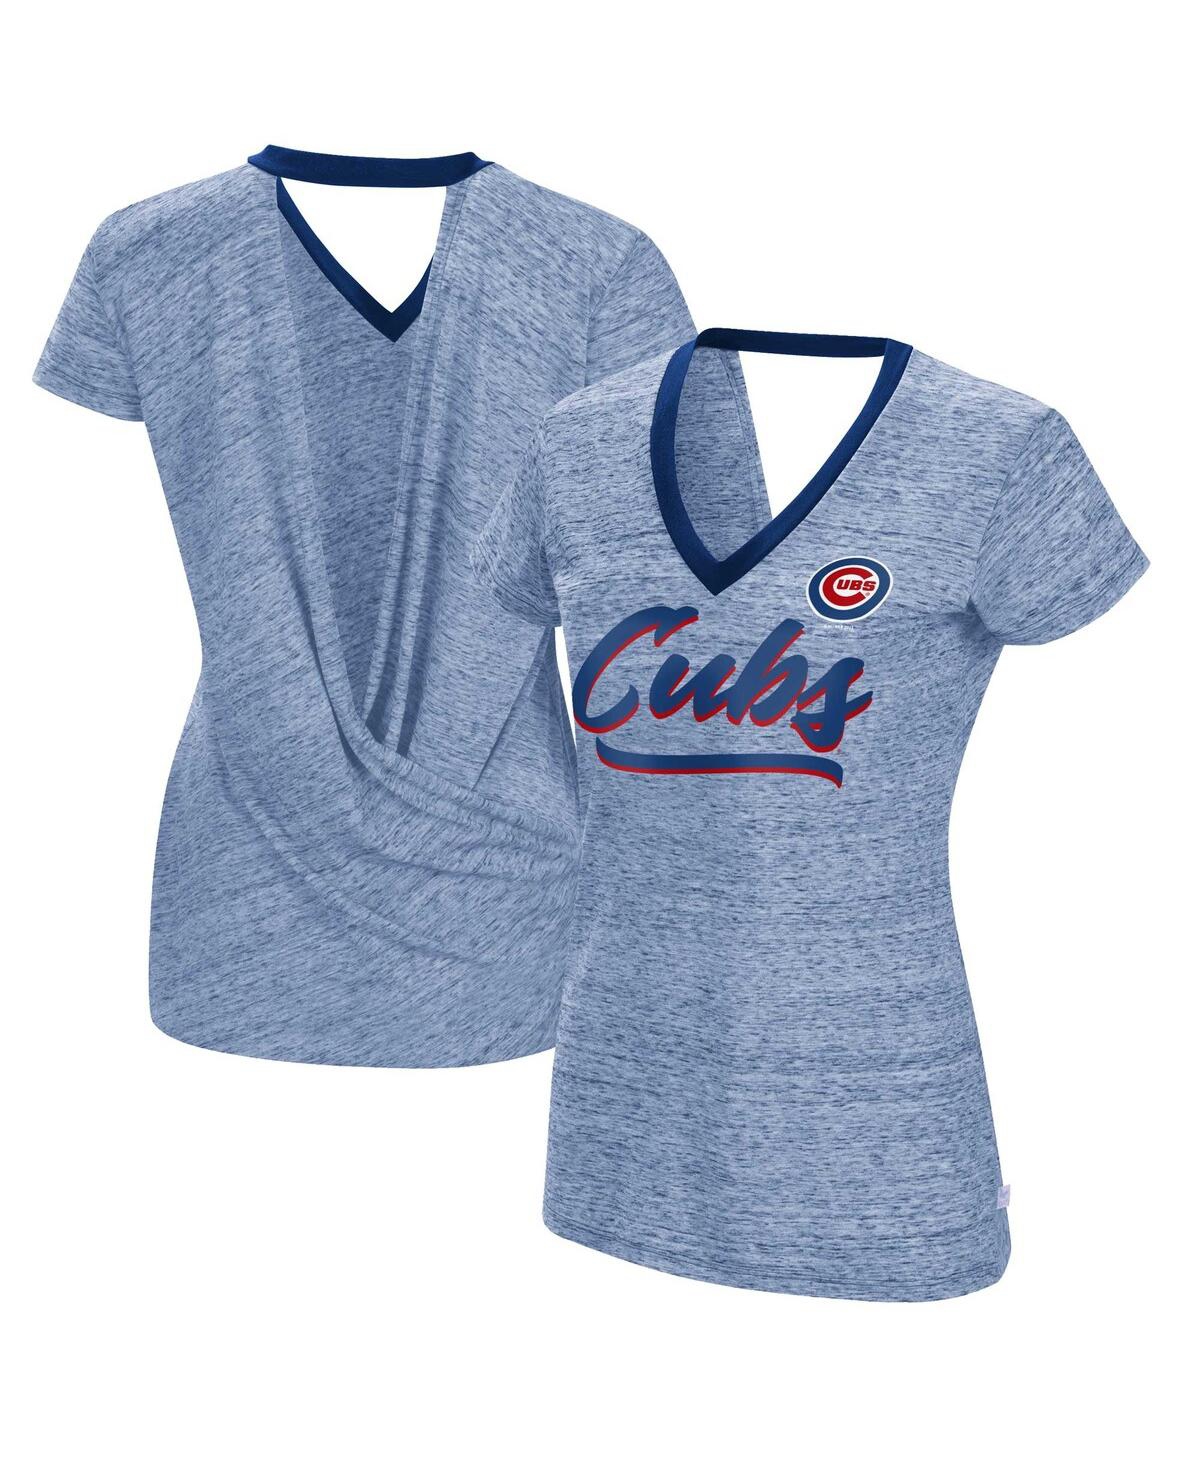 Women's Touch Royal Chicago Cubs Halftime Back Wrap Top V-Neck T-shirt - Royal